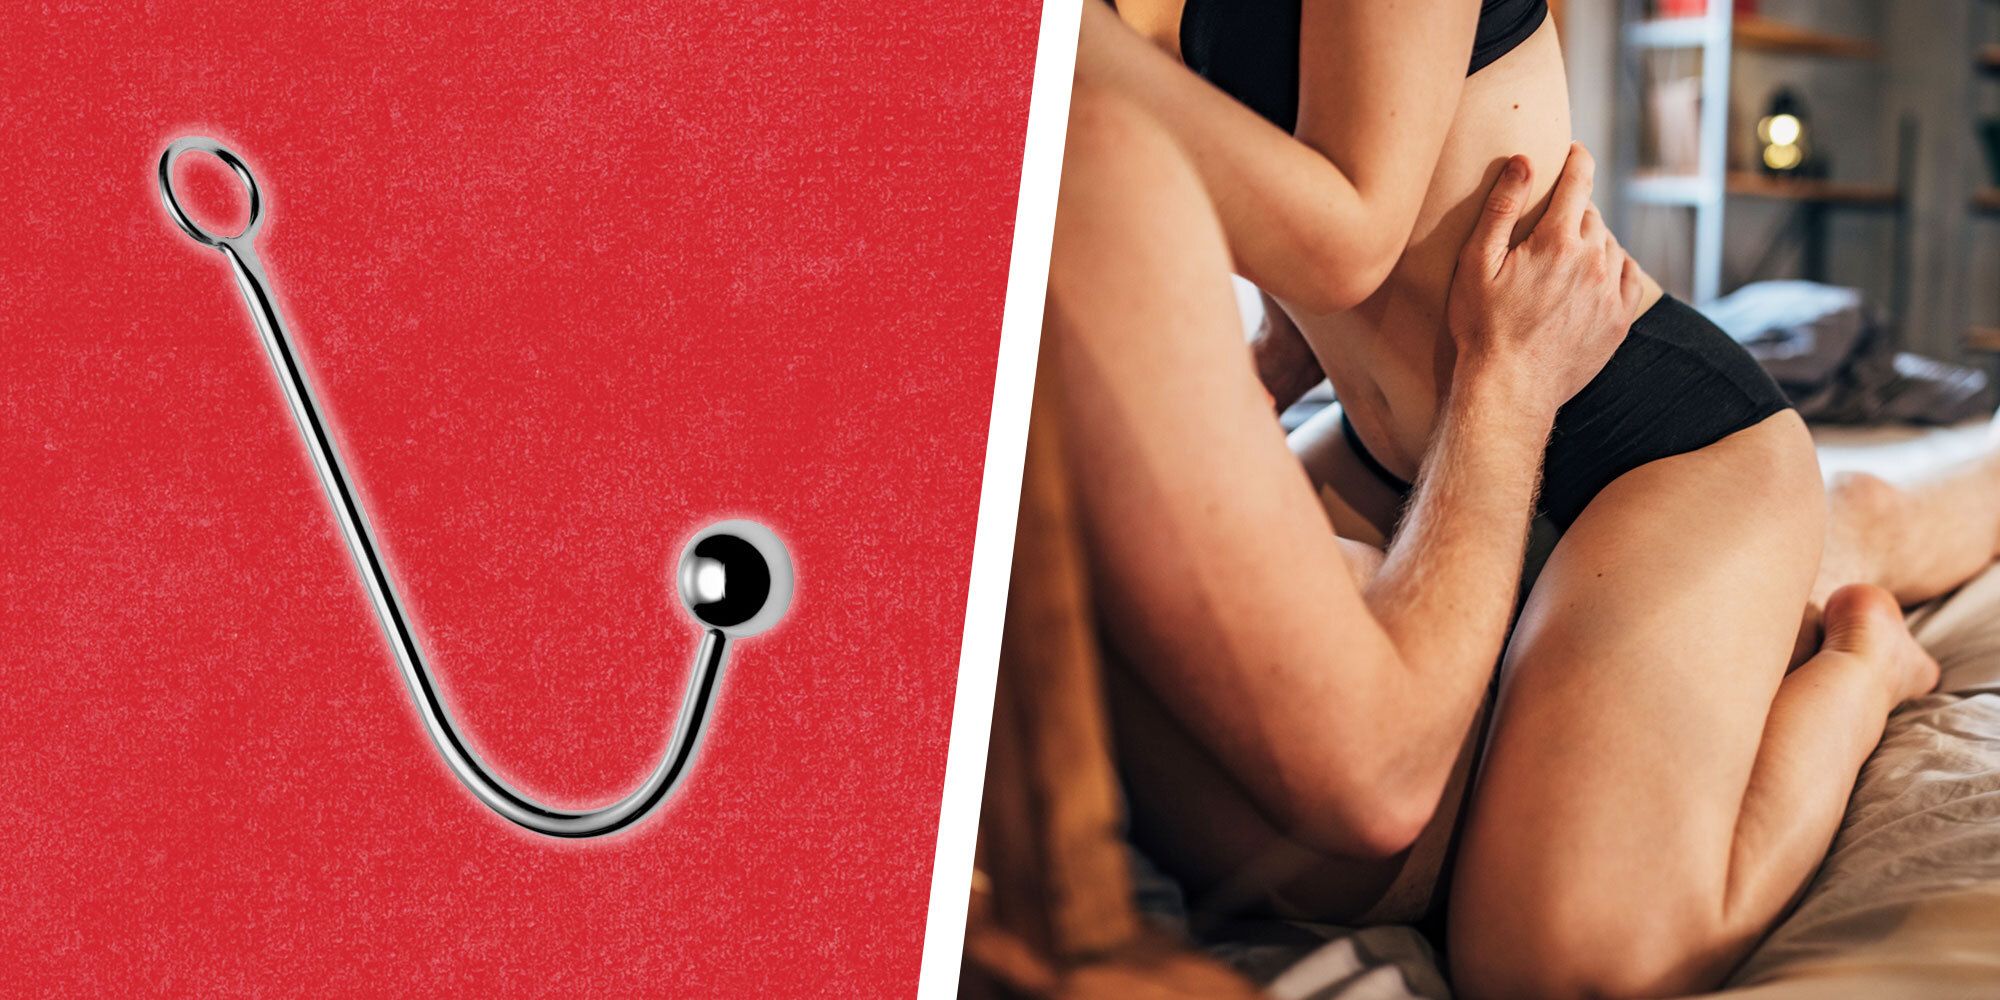 Anal Hooks What They Are and How to Use Them, According to Experts picture picture